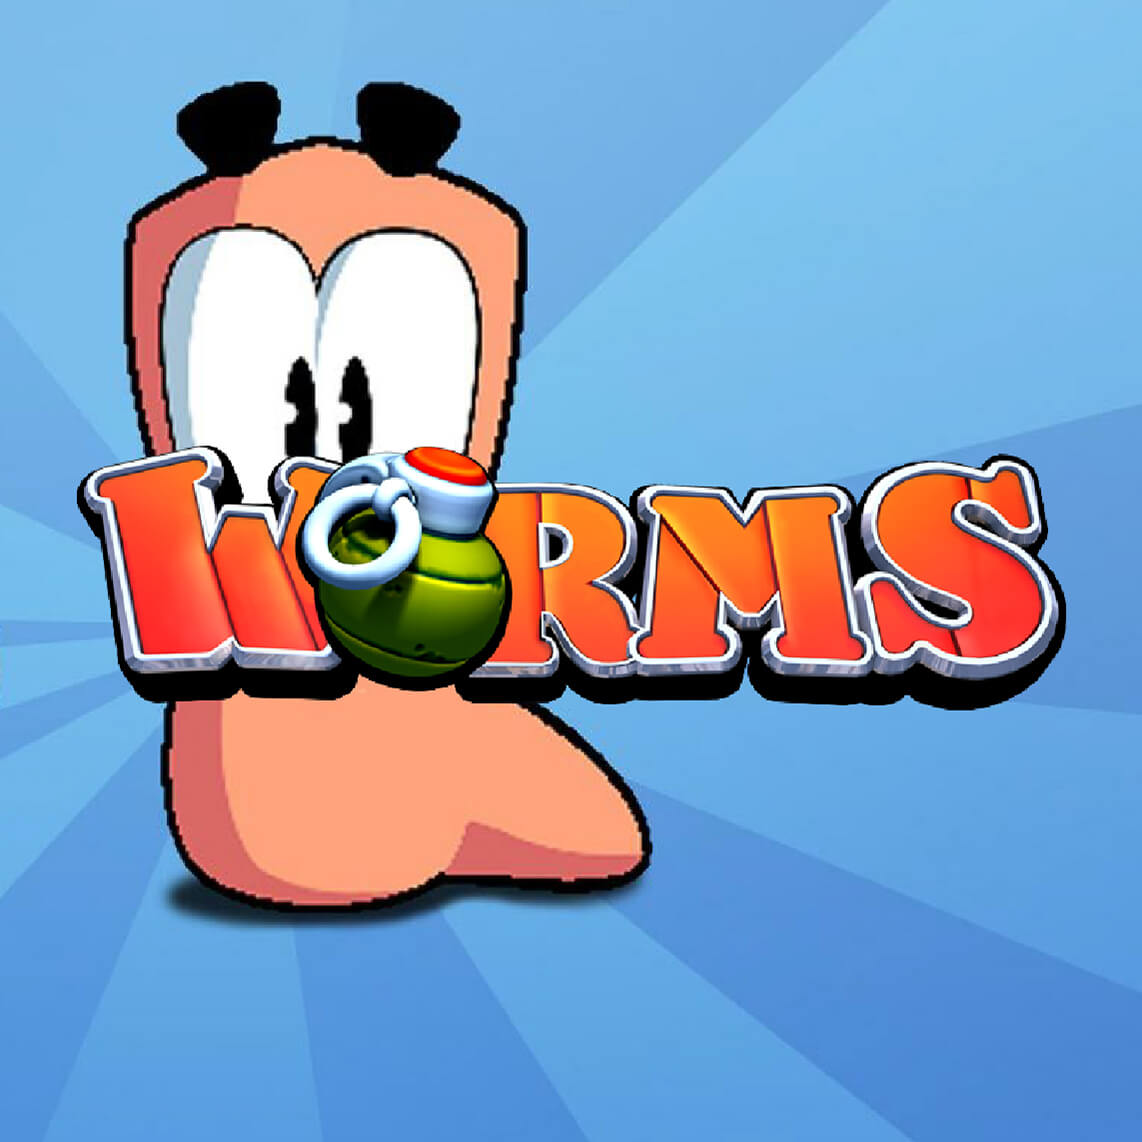 free download xbox 360 worms games